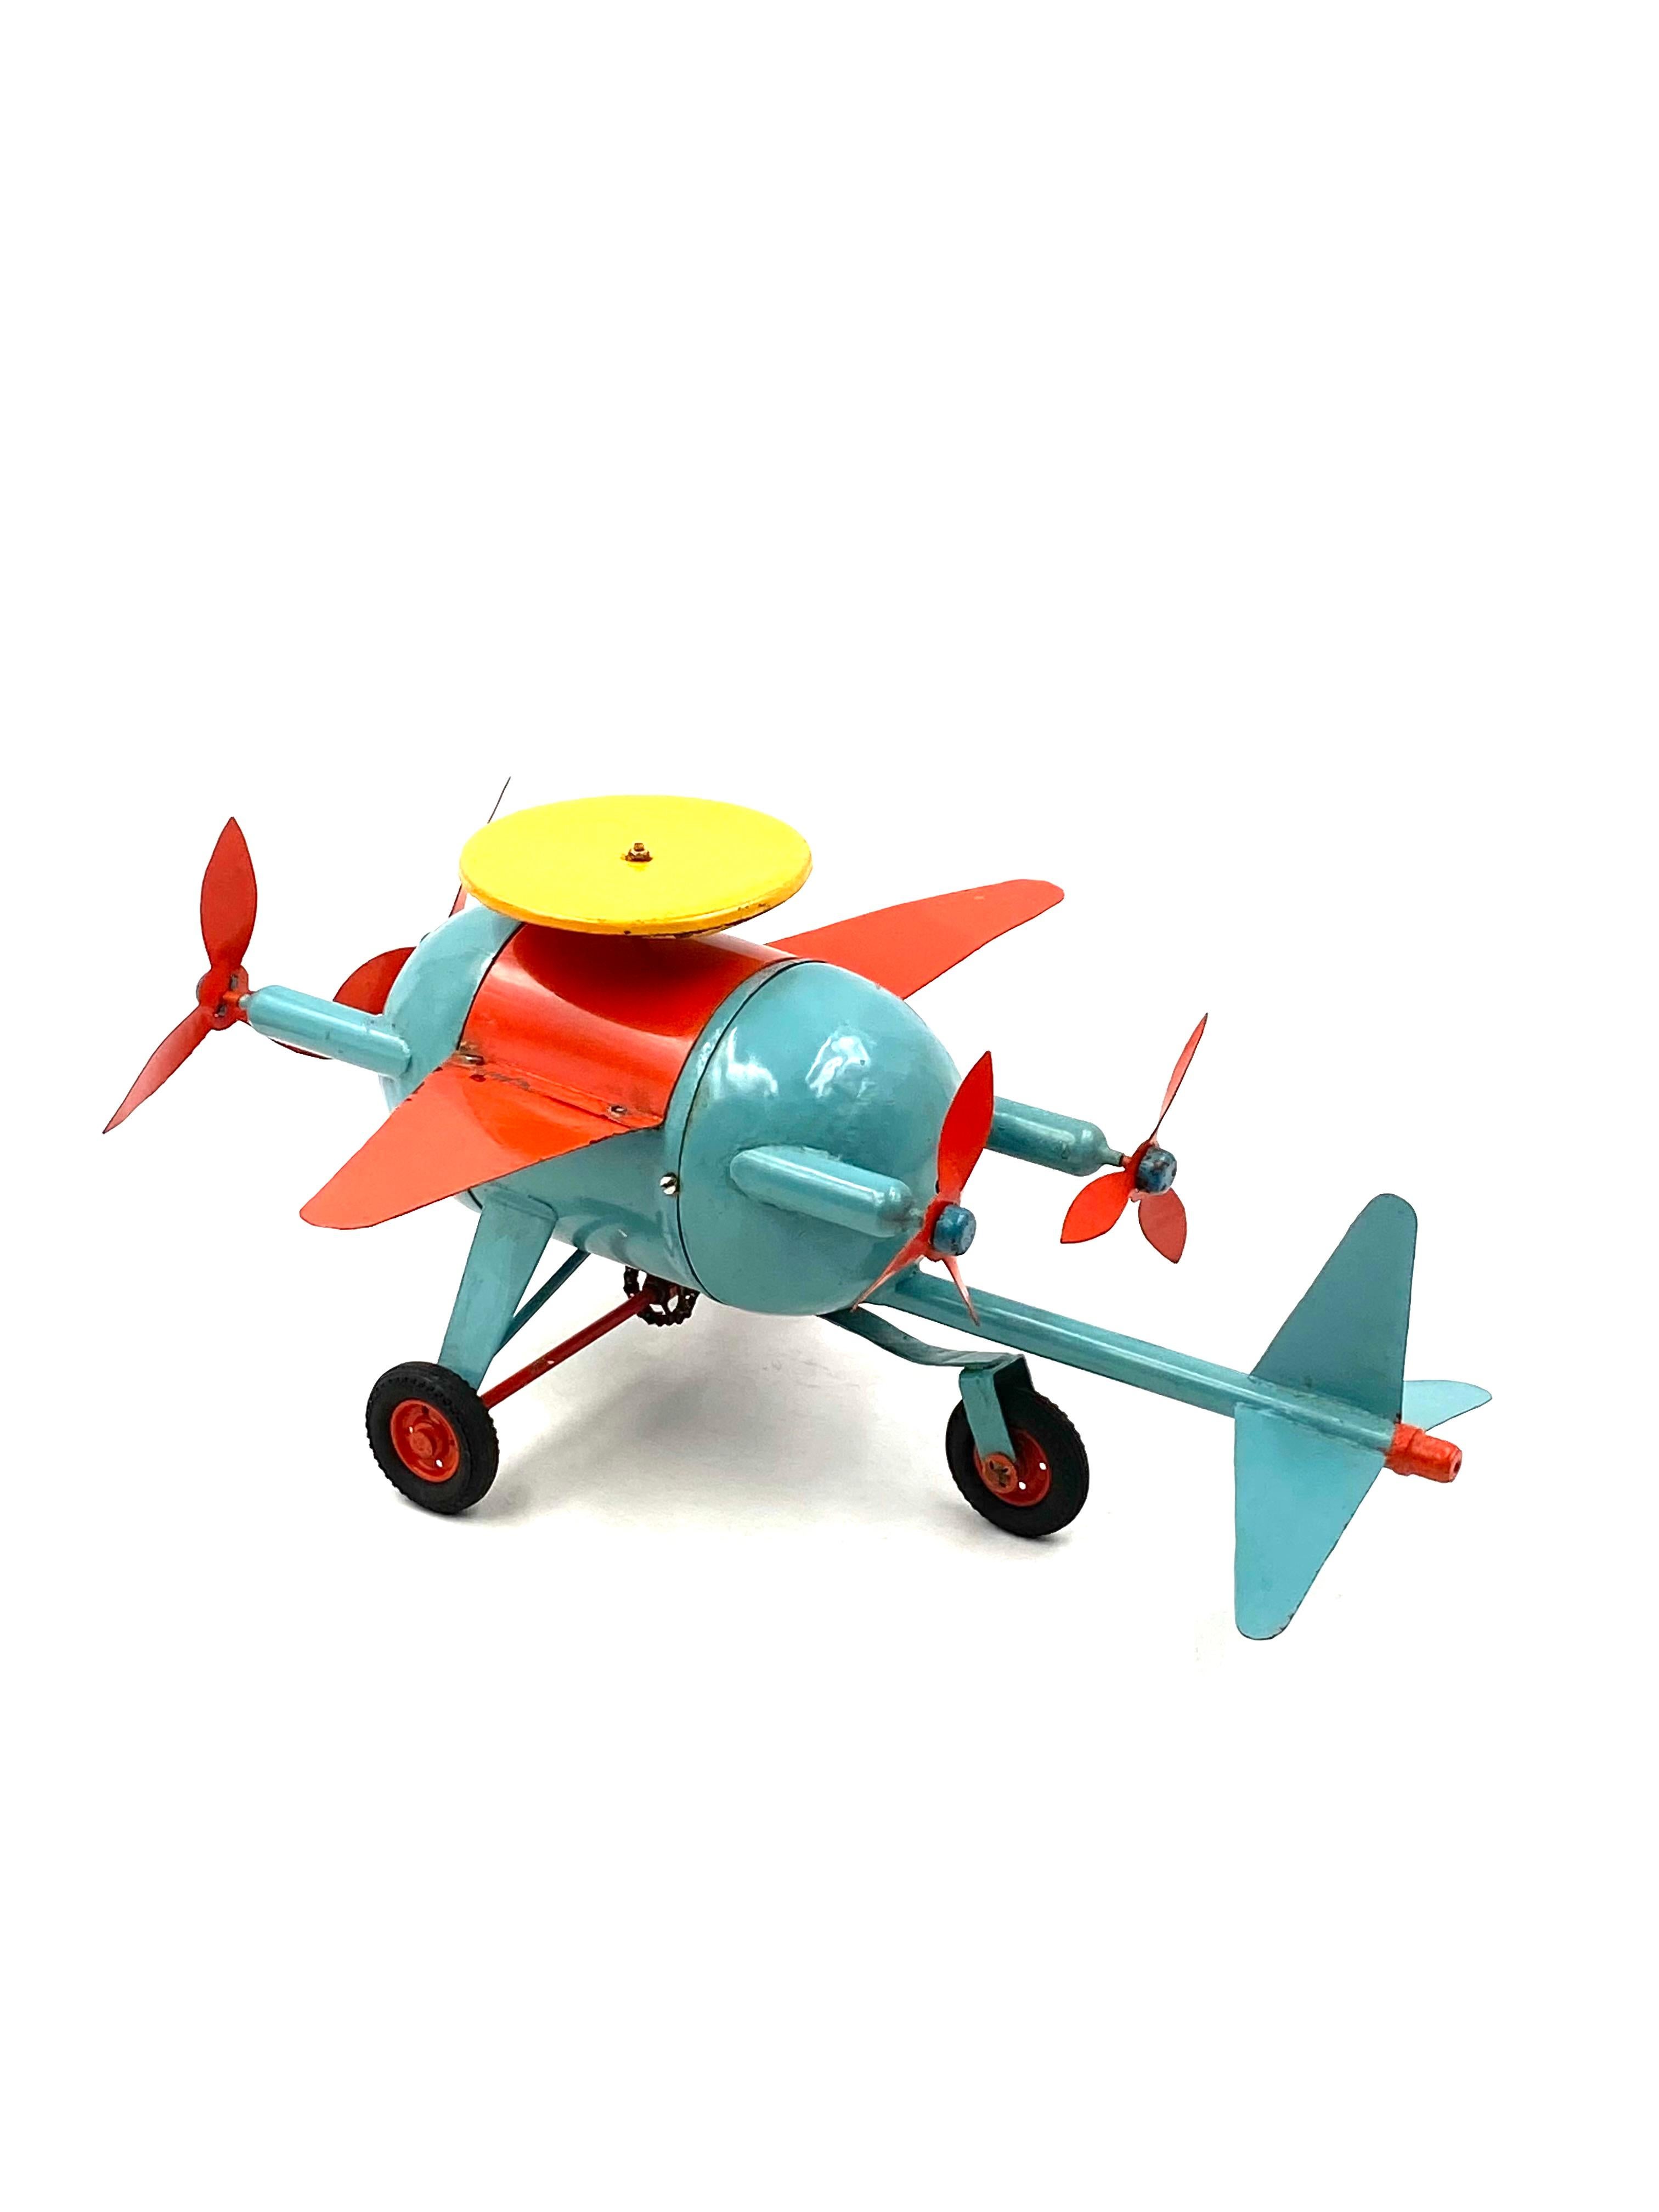 Red and blue airplane toy, France early 20th century For Sale 2